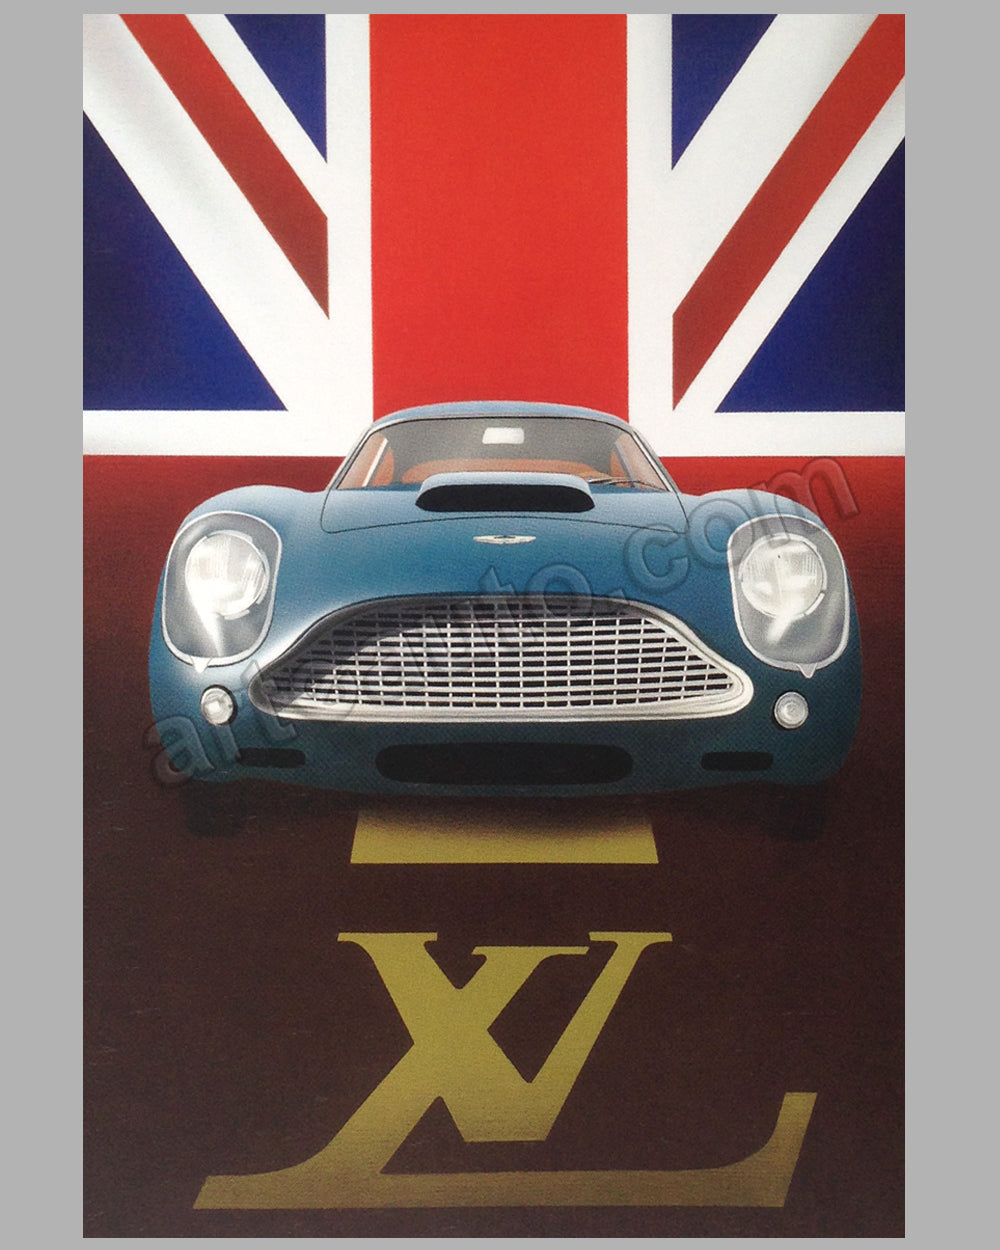 A Louis Vuitton Classic 2004 at Waddesdon Manor Advertising poster